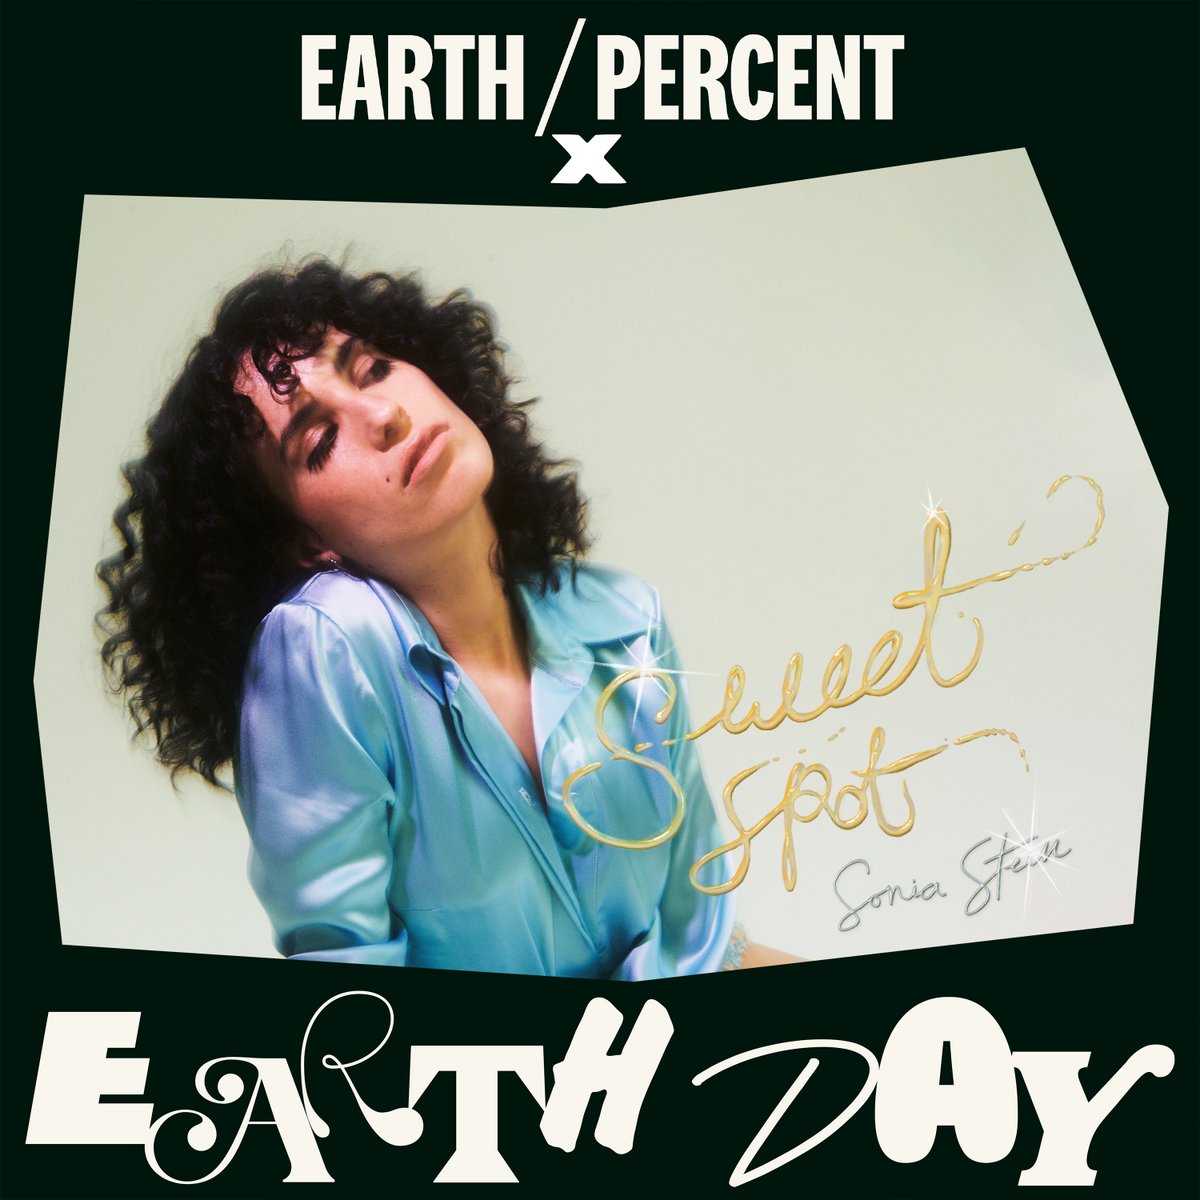 .@earthpercentorg are a charity that through music raises money to fund the most effective environmental orgs.

Follow the link in my bio to be involved in this v cool organisation while jamming to this extra cute song, “Sweet Spot”. #EarthPercentEarthDay #NOMUSICONADEADPLANET